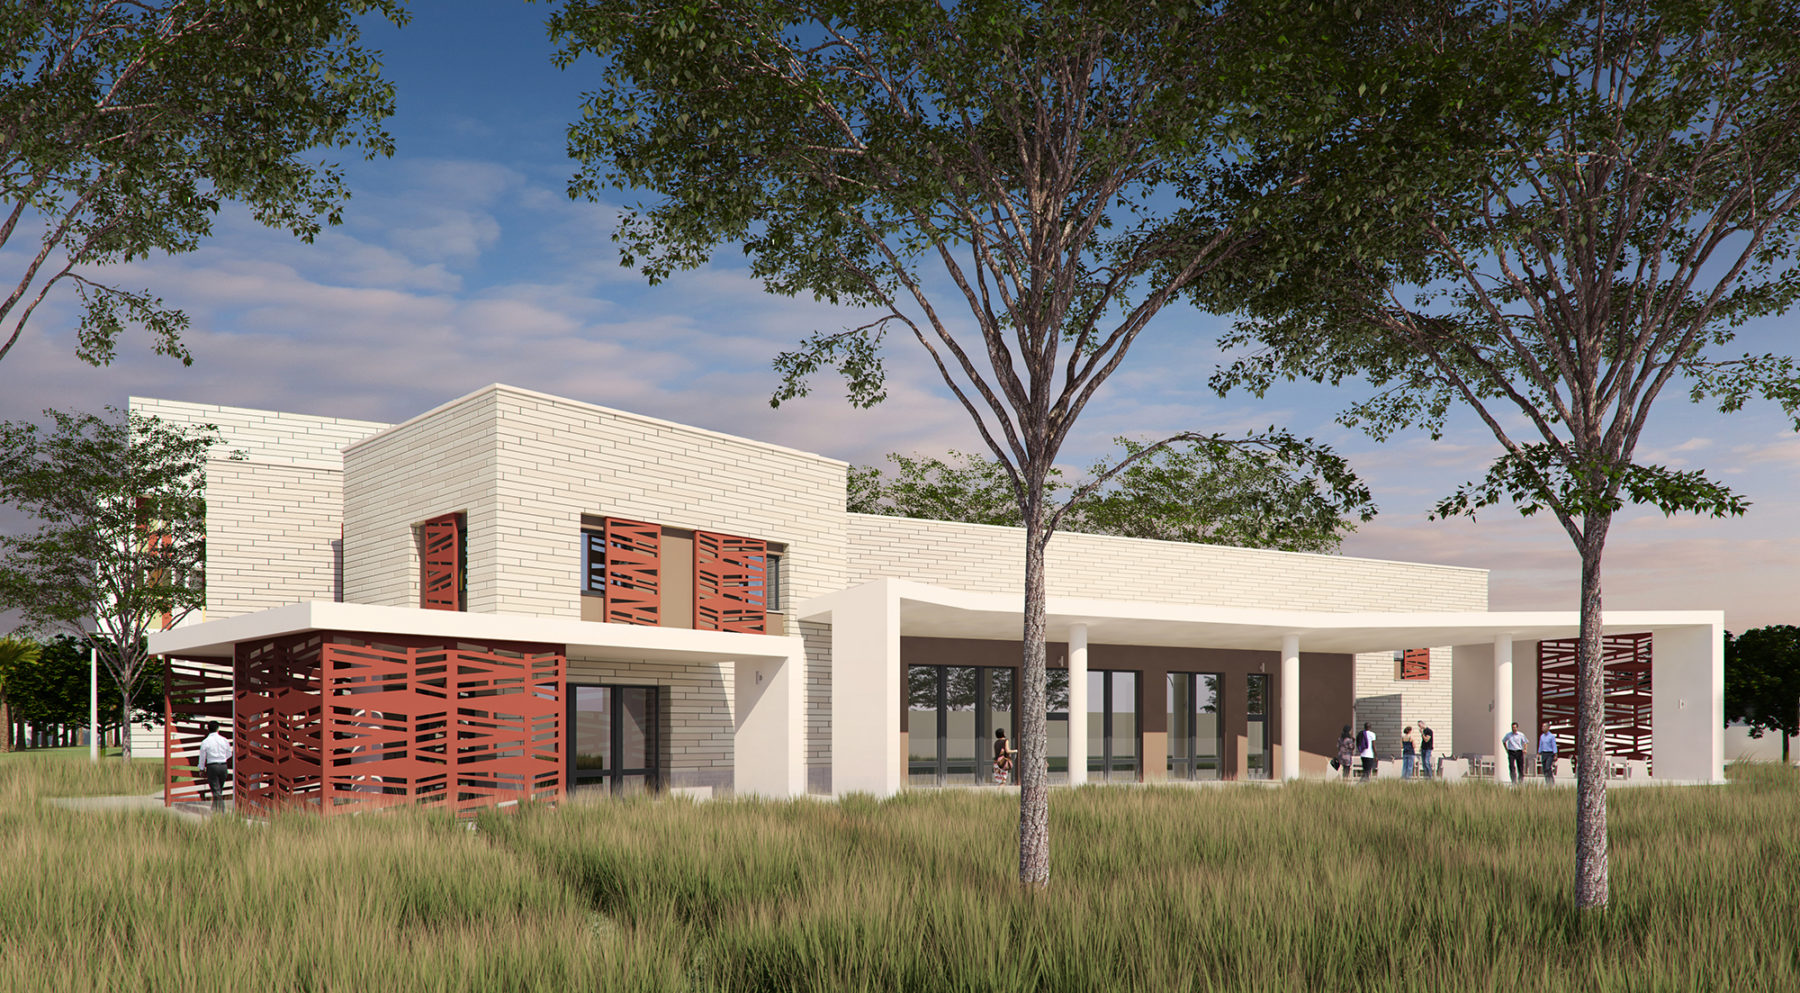 exterior rendering view with grasses and trees in foreground